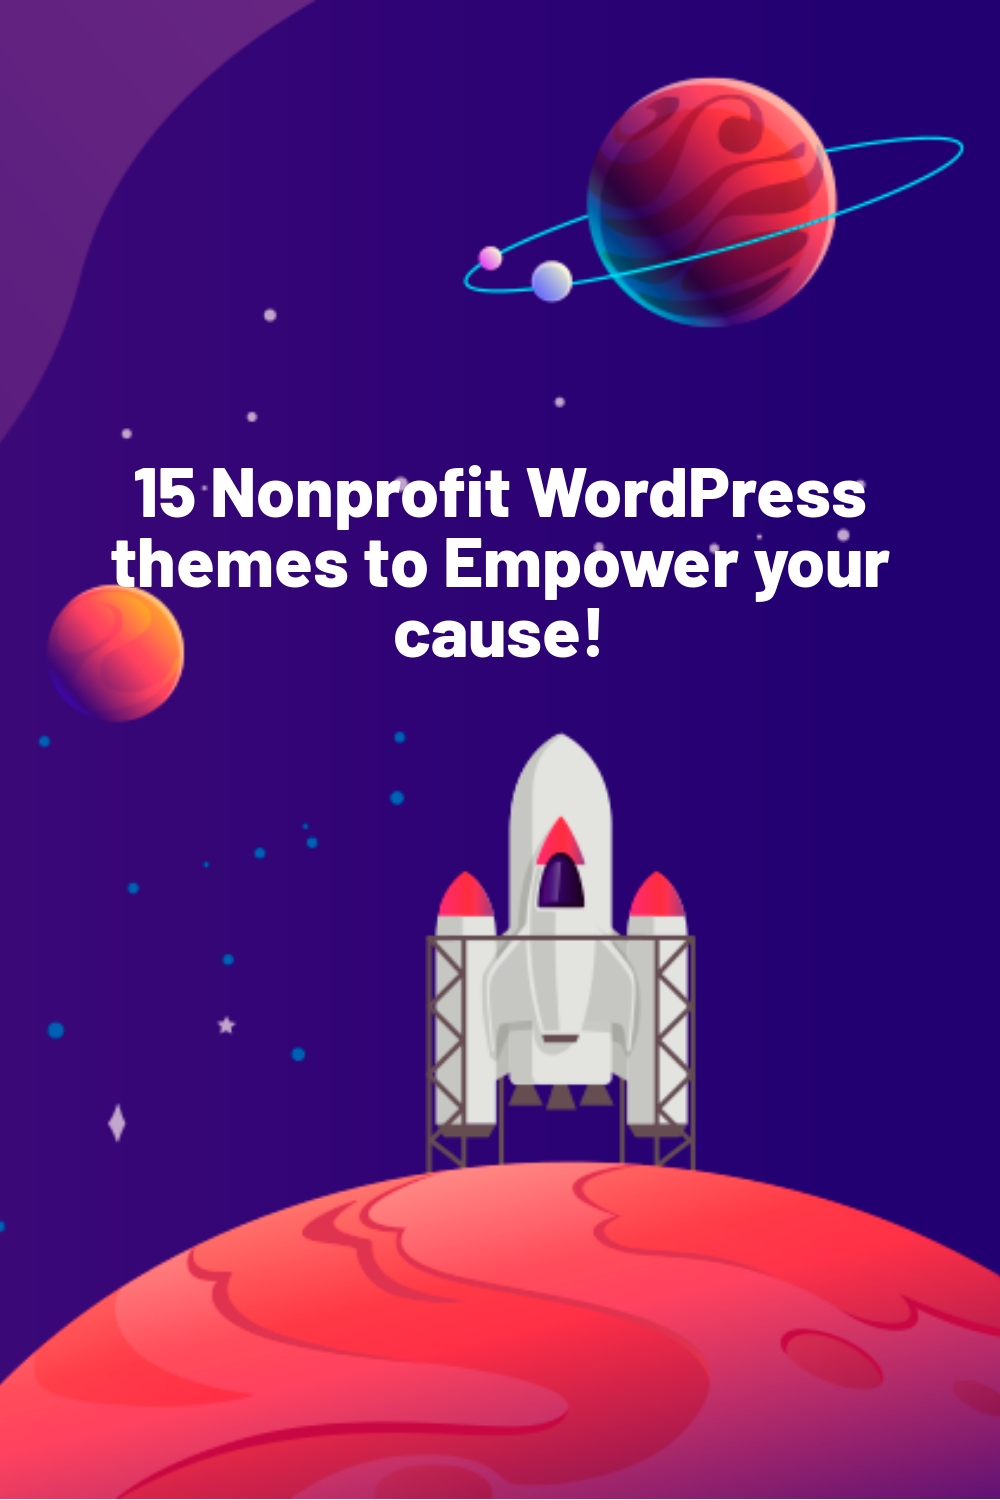 15 Nonprofit WordPress themes to Empower your cause!